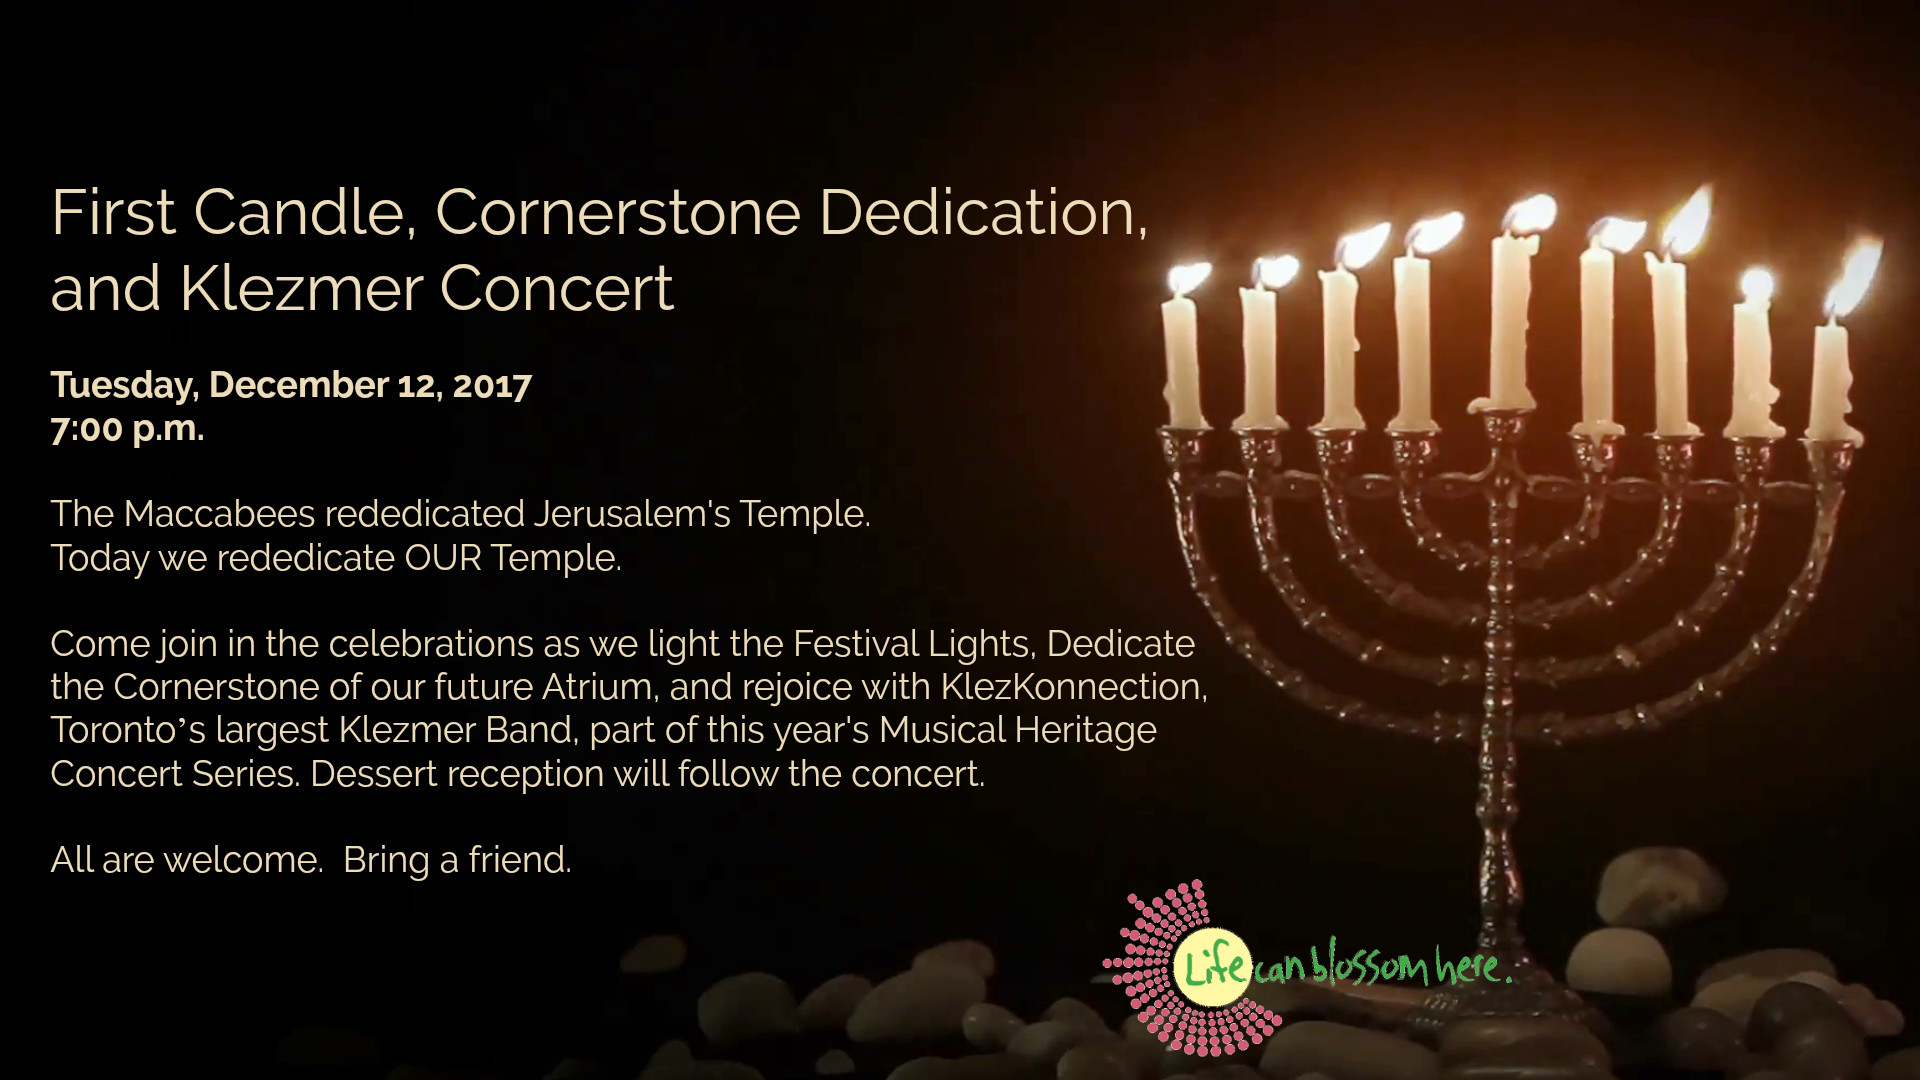 1920x1080 First Candle, Cornerstone Dedication, and Klezmer Concert